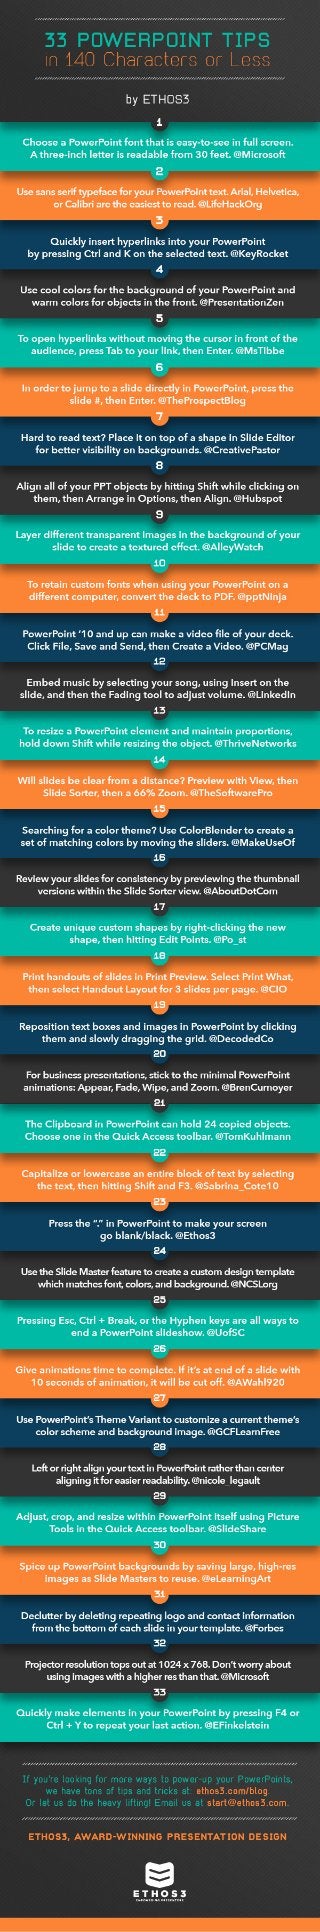 33 PowerPoint Tips, in 140 characters or less